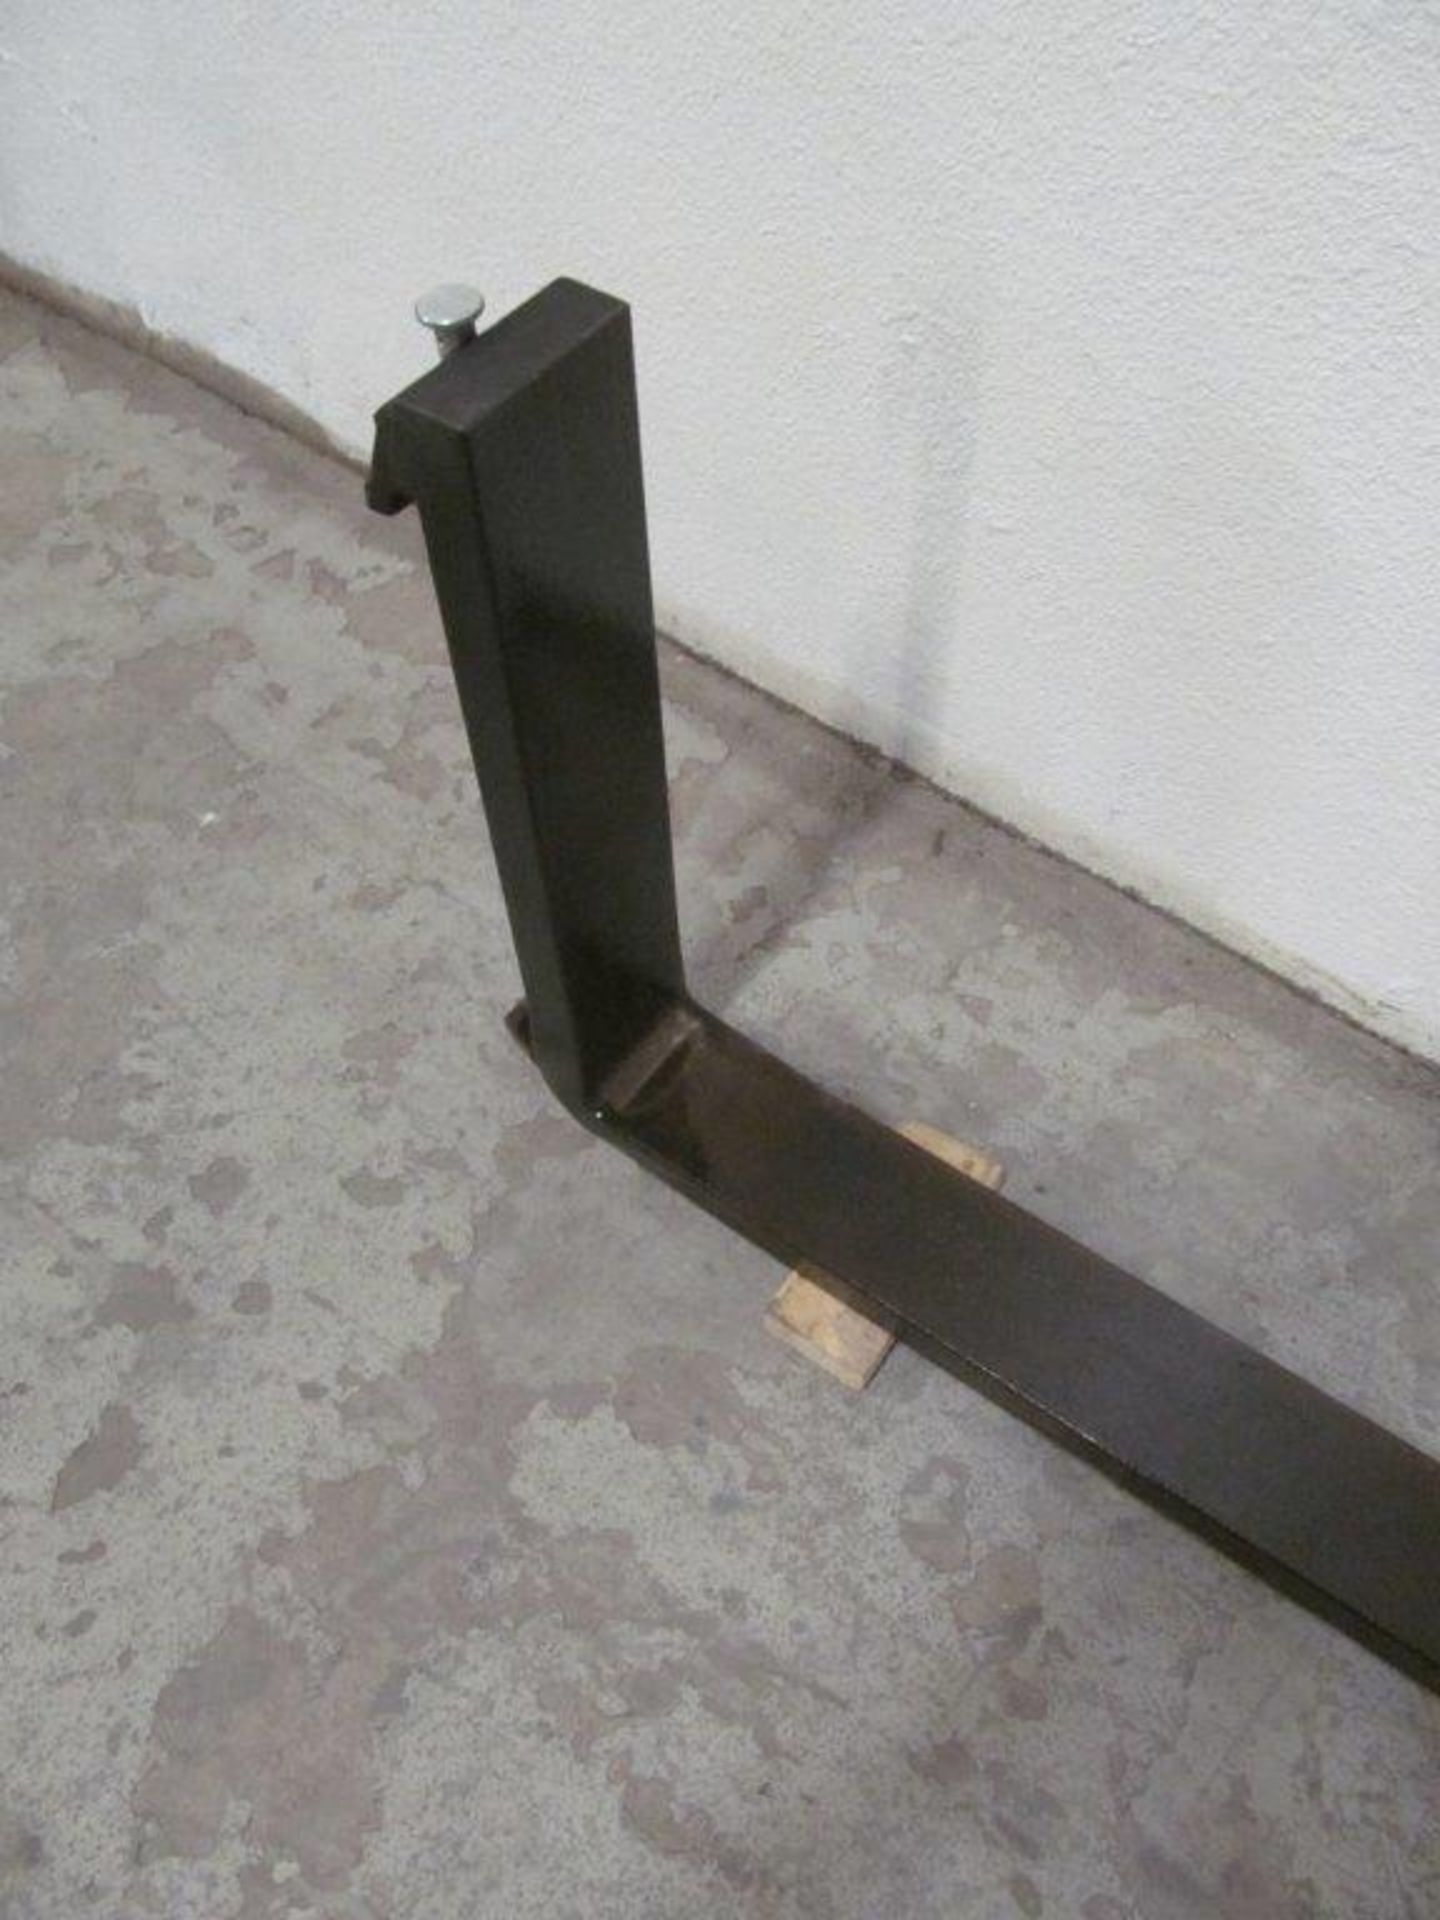 H.D FORKLIFT FORK, 20 1/4'', 5'' WIDE X 9FT LONG - LOCATION - HAWKESBURY, ONTARIO - Image 2 of 3